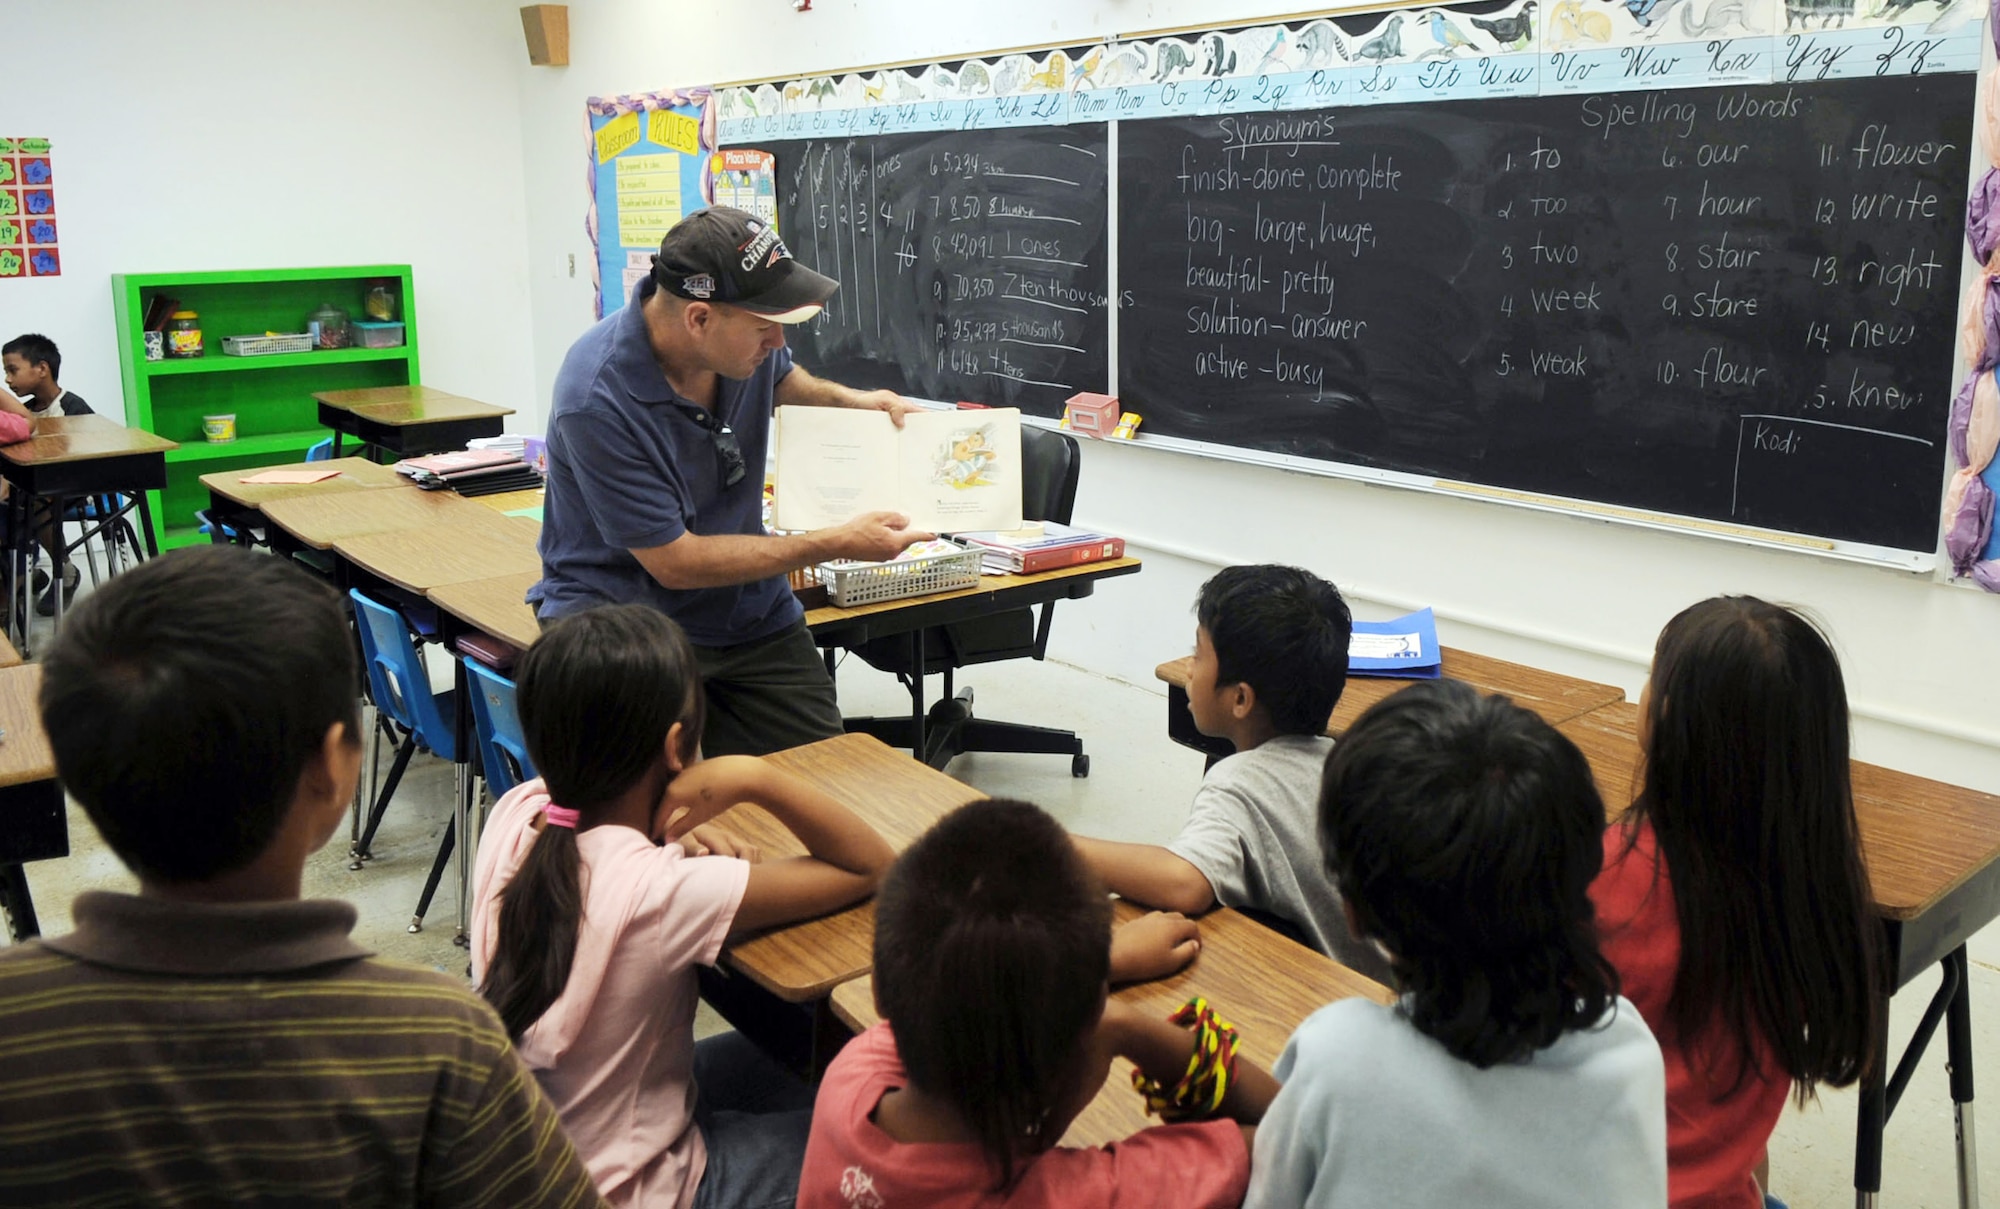 Senior Master Sgt. Peter Allan reads to third and fourth graders June 19 at Machananao Elementary School in Agana, Guam. The North Conway, N.H., native is deployed to Andersen Air Force Base, Guam, from Elmendorf AFB, Alaska, to support U.S. Pacific Command's continuous bomber presence in the Asia-Pacific Region. Sergeant Allan is a superintendent with the 525th Expeditionary Aircraft Maintenance Unit. (U.S. Air Force photo/Senior Airman Christopher Bush) 
